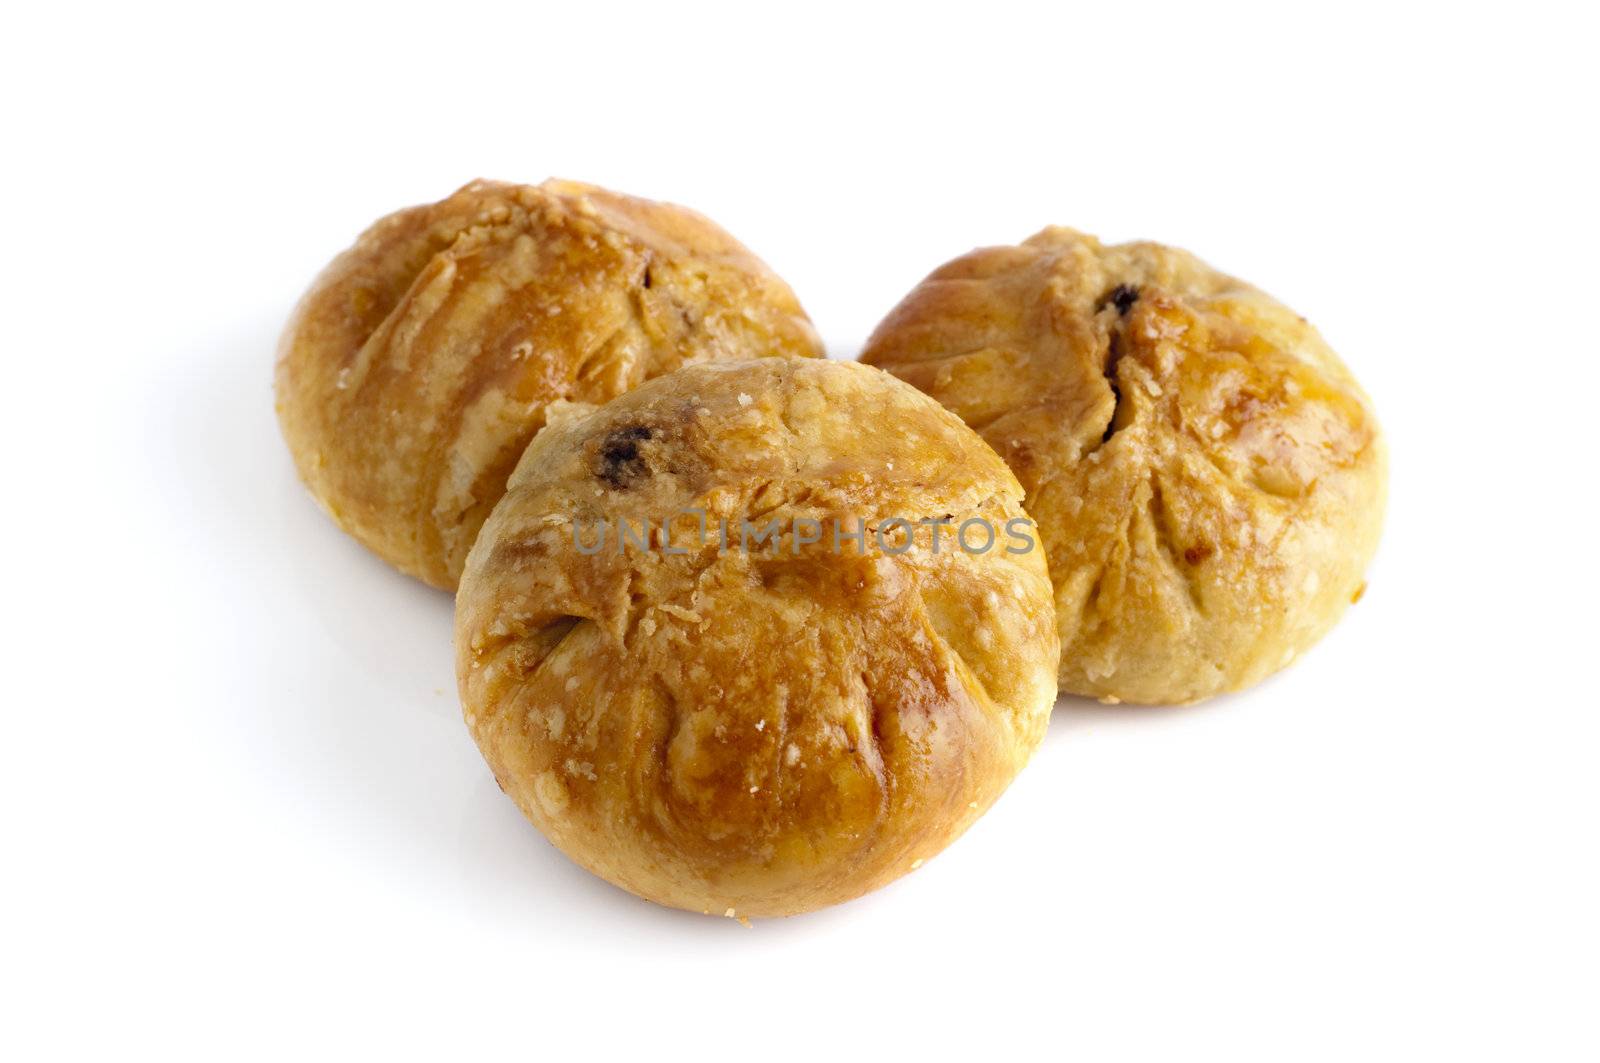 Famous Malaysian food - Seremban Siew pau. It is a type of baked bun with flaky pastry bun and meat (usually pork) filling.